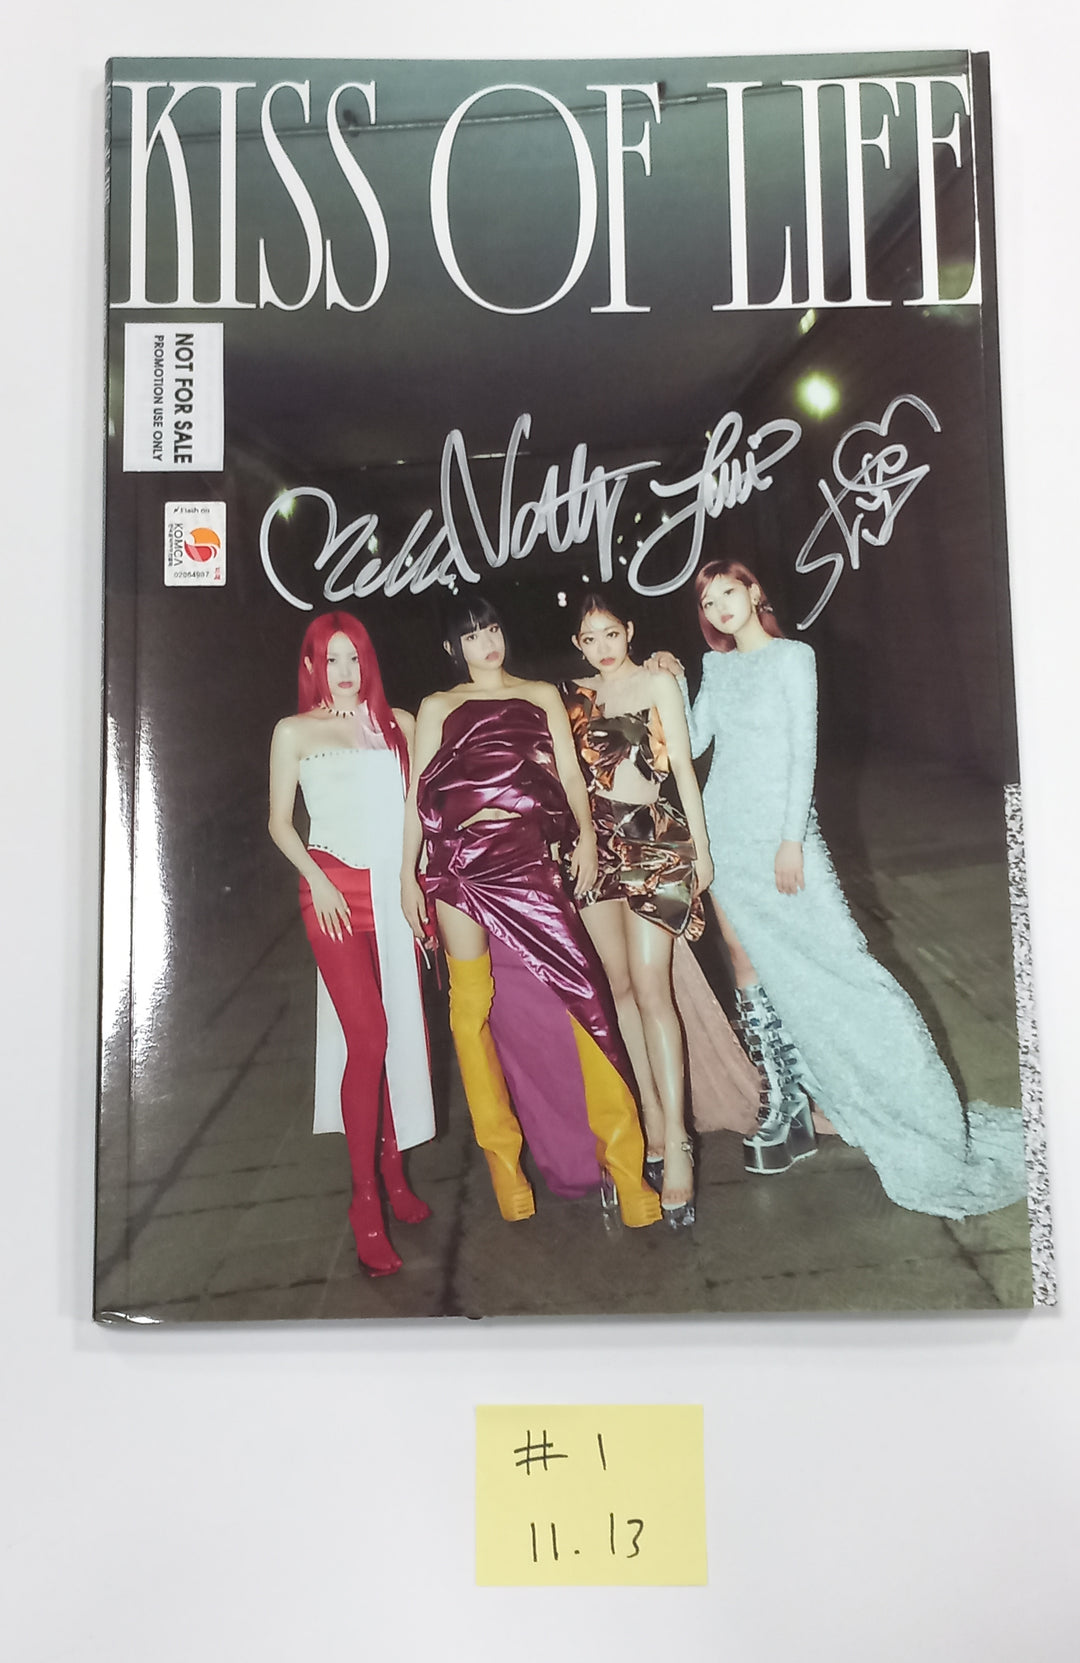 KISS OF LIFE "Born to be XX" - Hand Autographed(Signed) Promo Album [23.11.13] (Restocked 11/15)